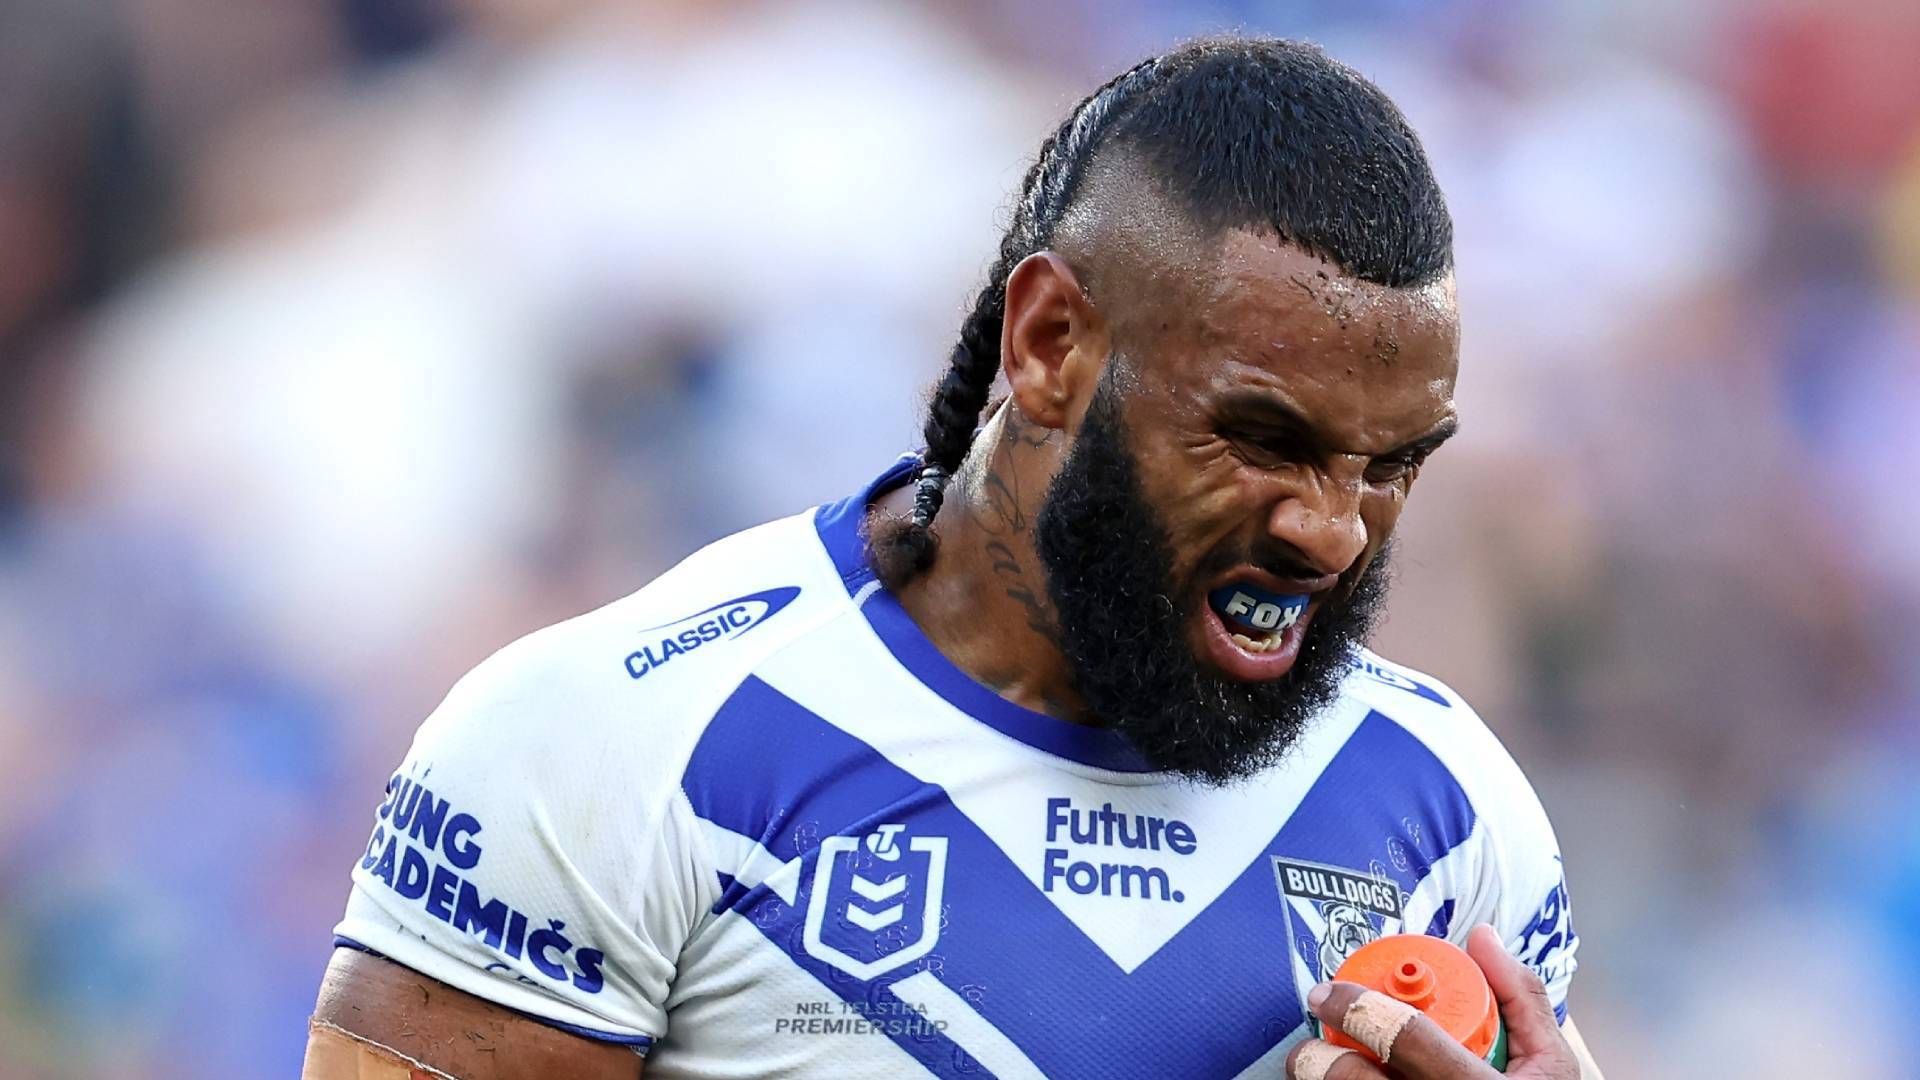 EXCLUSIVE: Phil Gould reveals surprise Josh Addo-Carr call amid injury drama